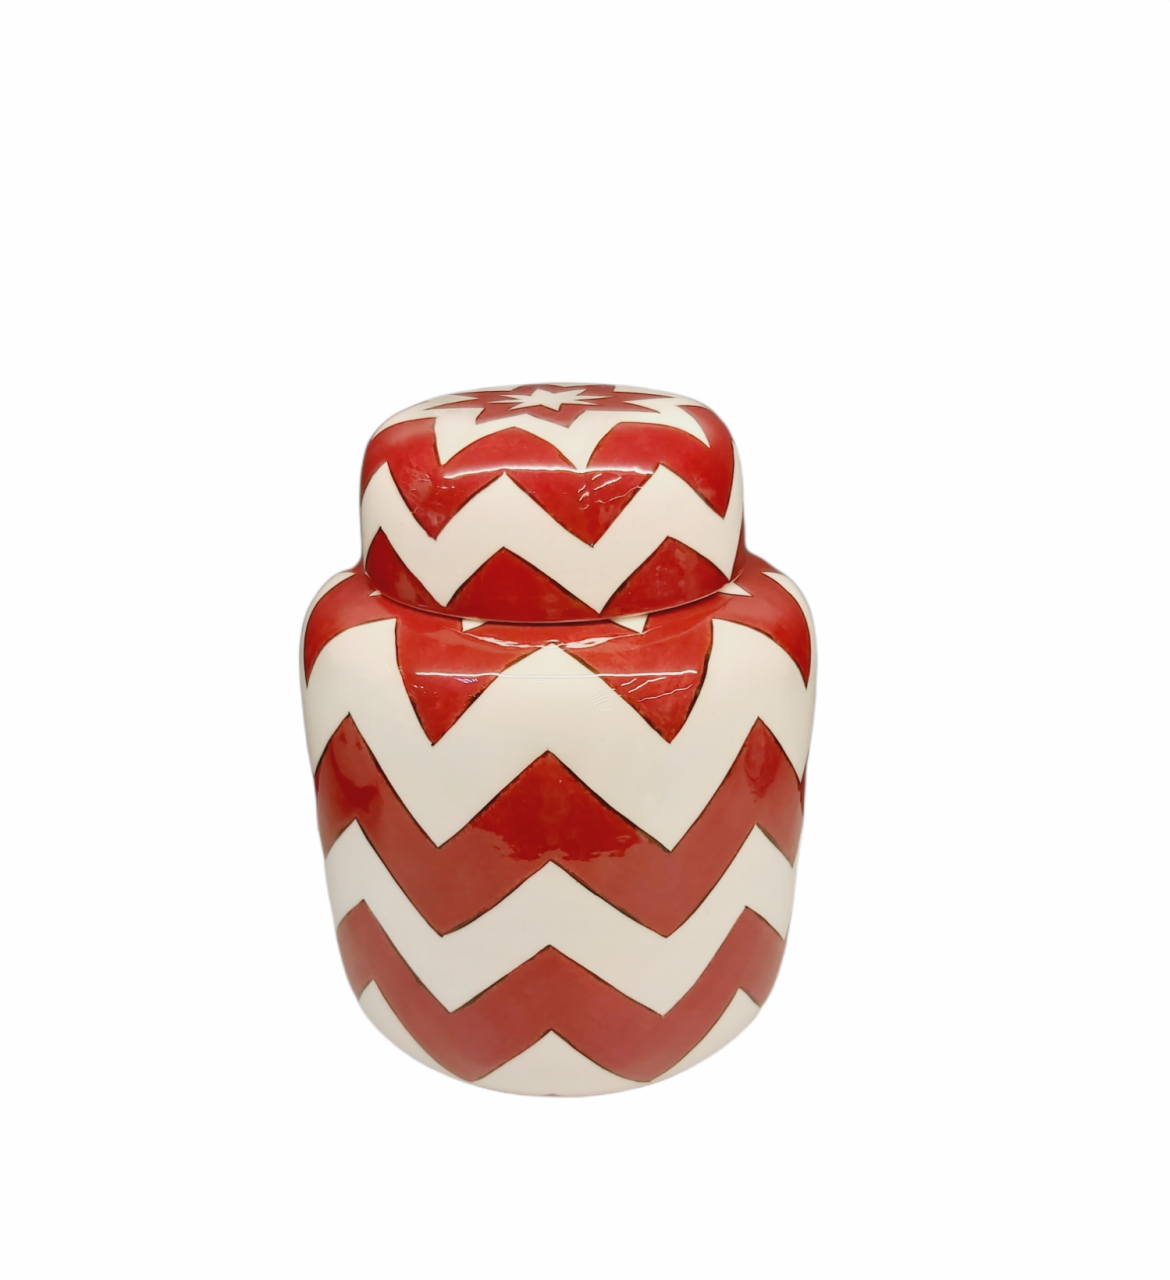 RED ZIGZAG CUBE